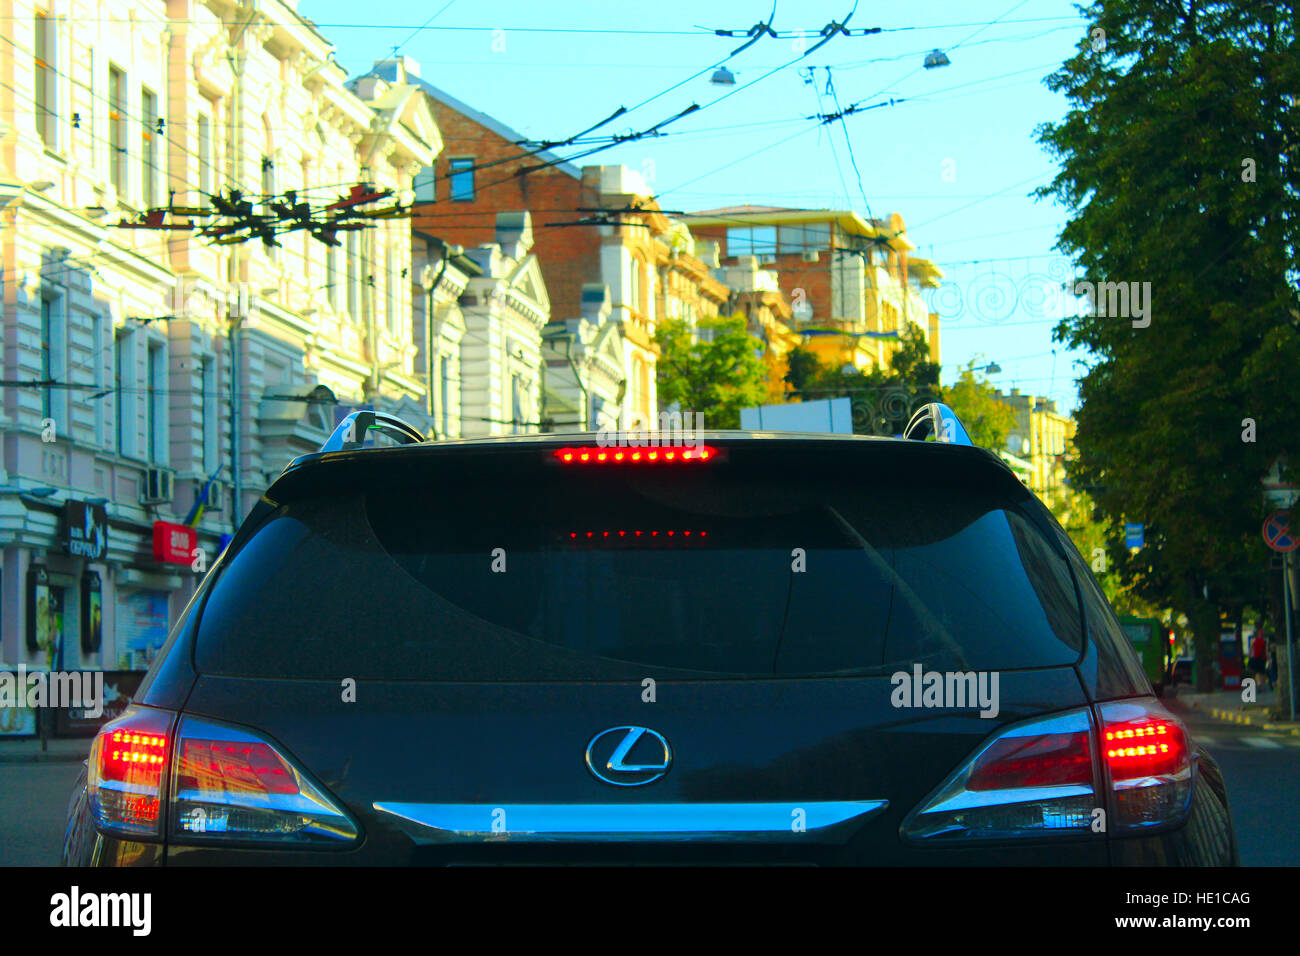 view of the back of the car Lexus while driving in Kharkov Stock Photo